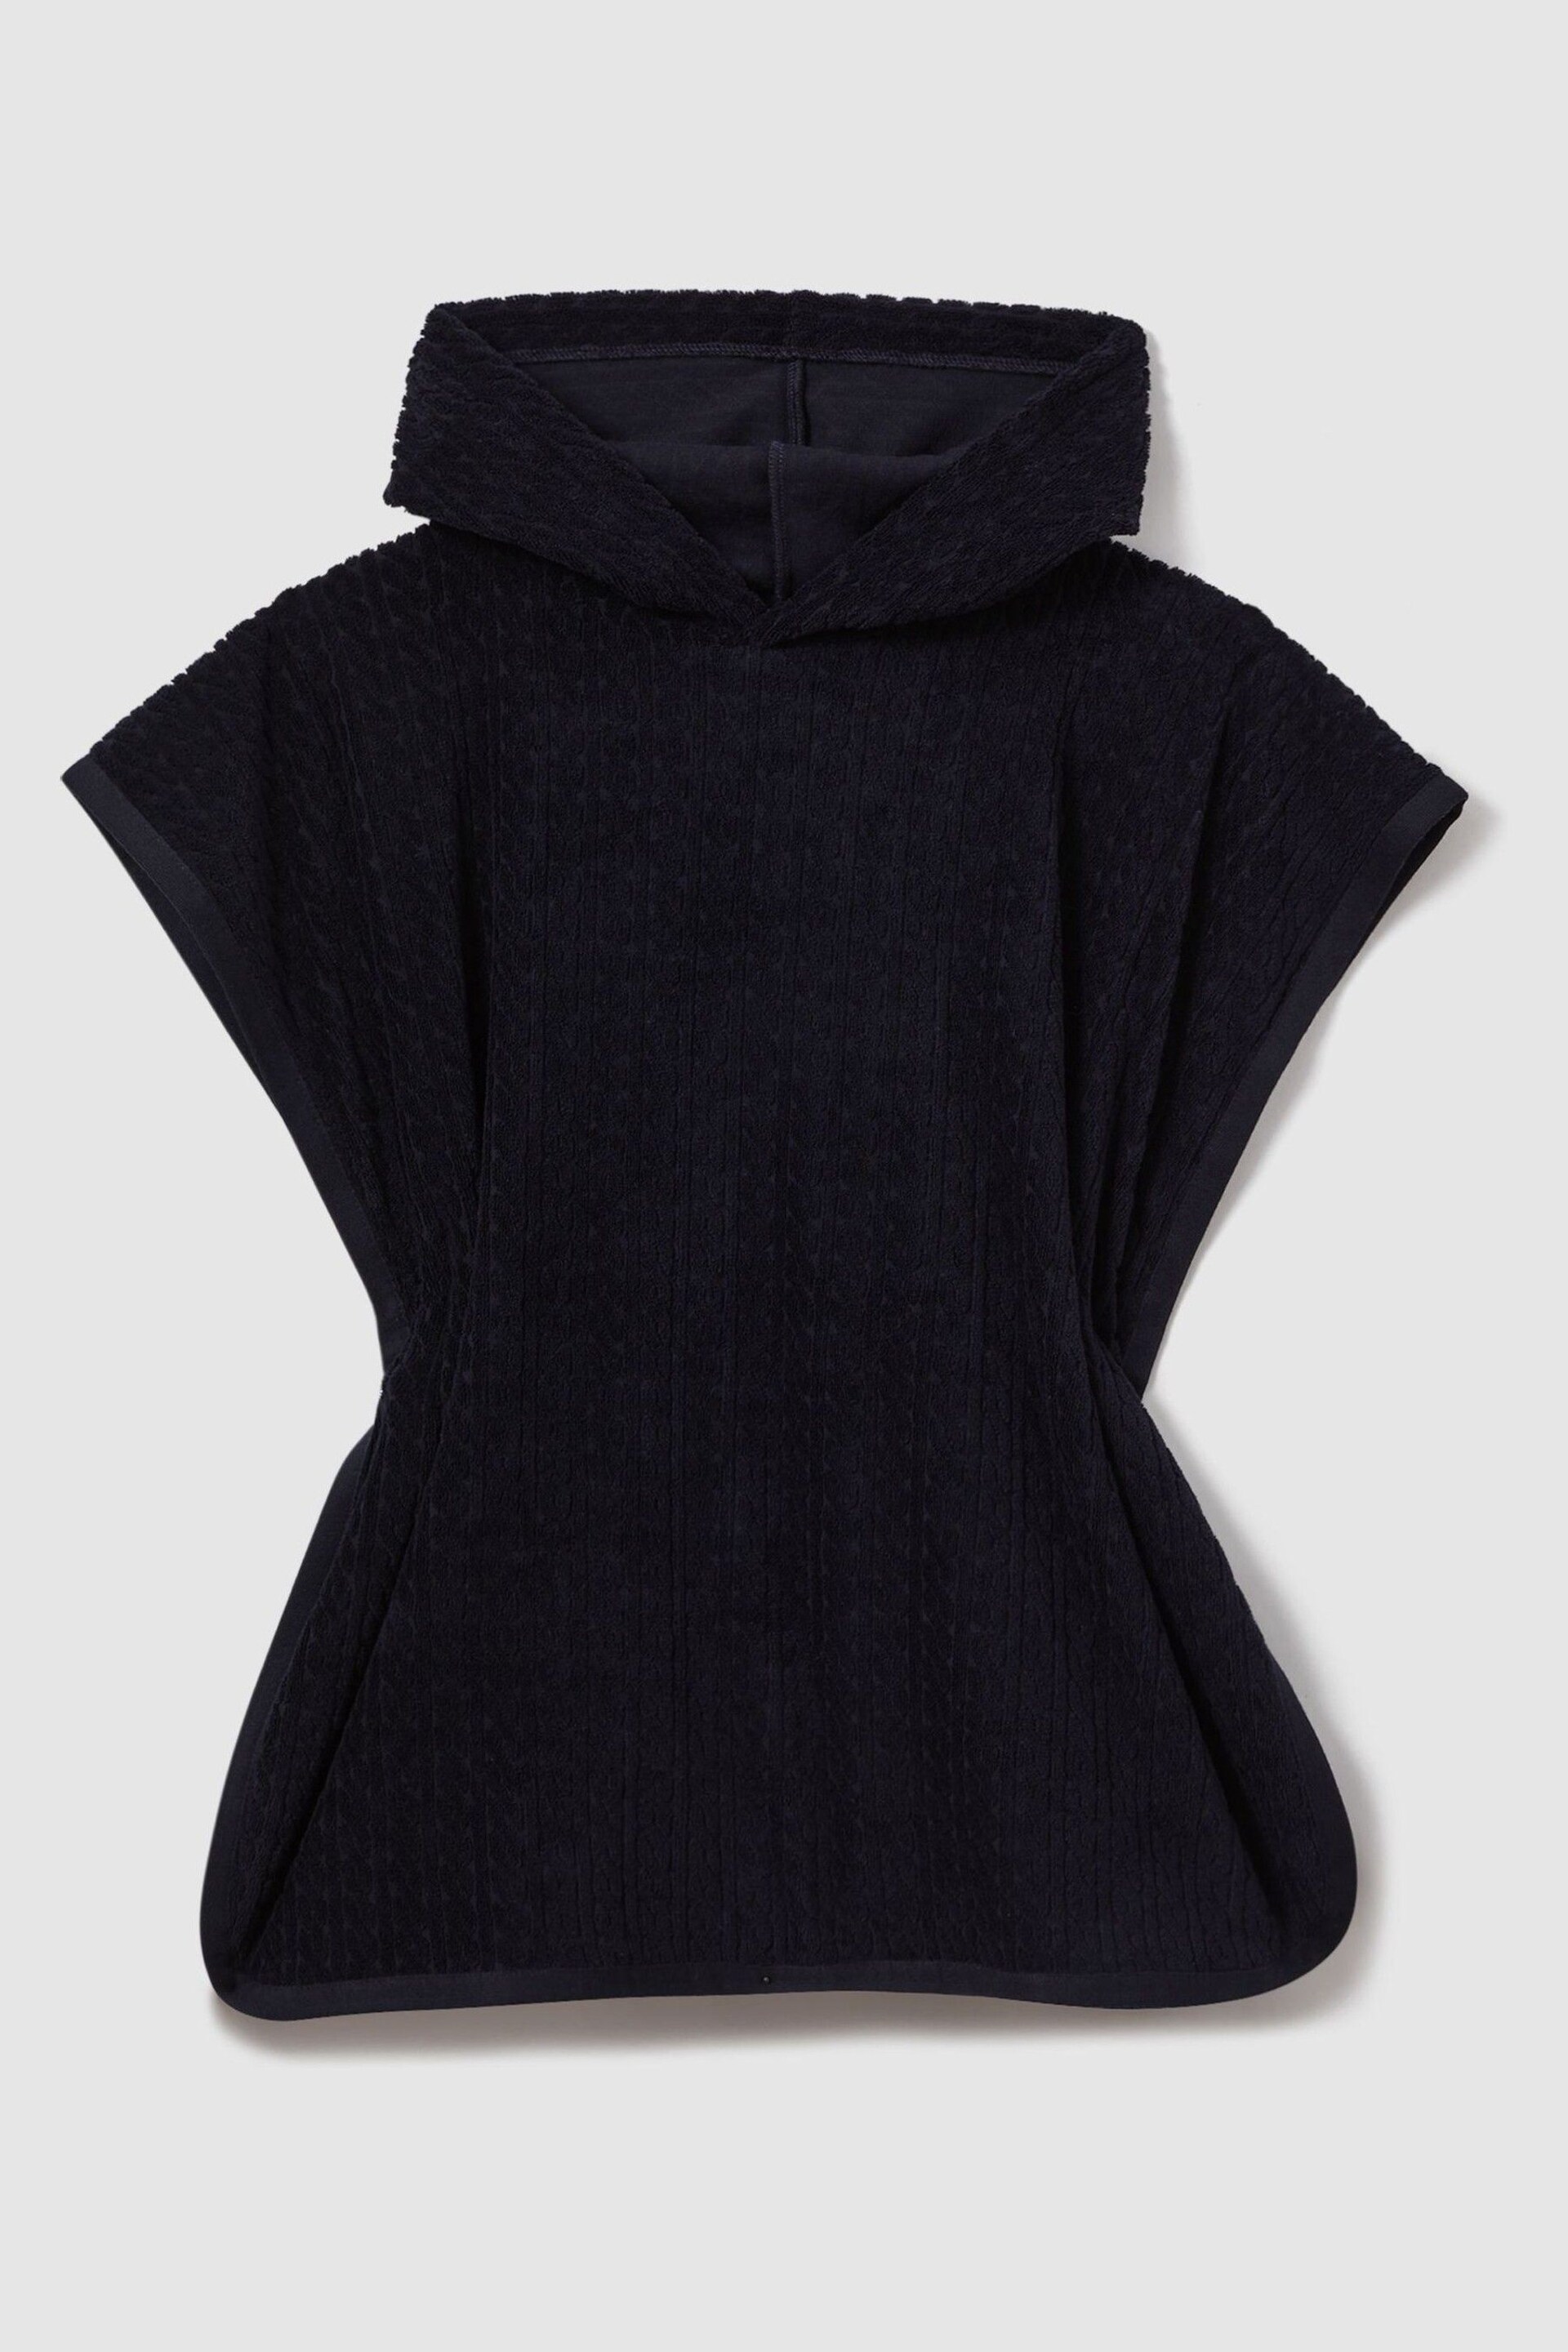 Reiss Navy Shine Textured Towelling Hooded Poncho - Image 2 of 4